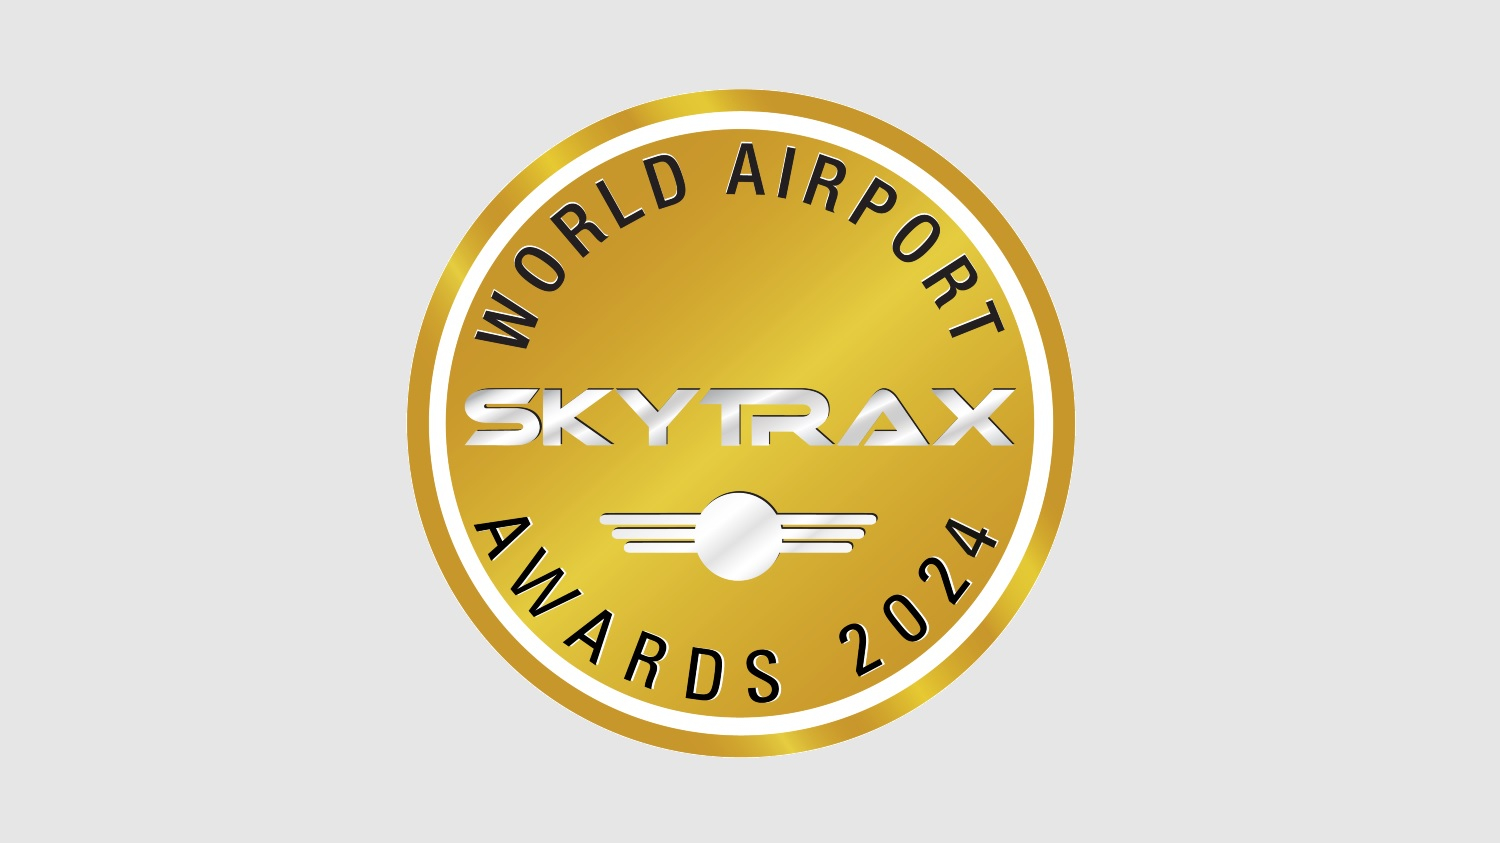 Skytrax Names SEA as Top U.S. Airport for Third Straight Year